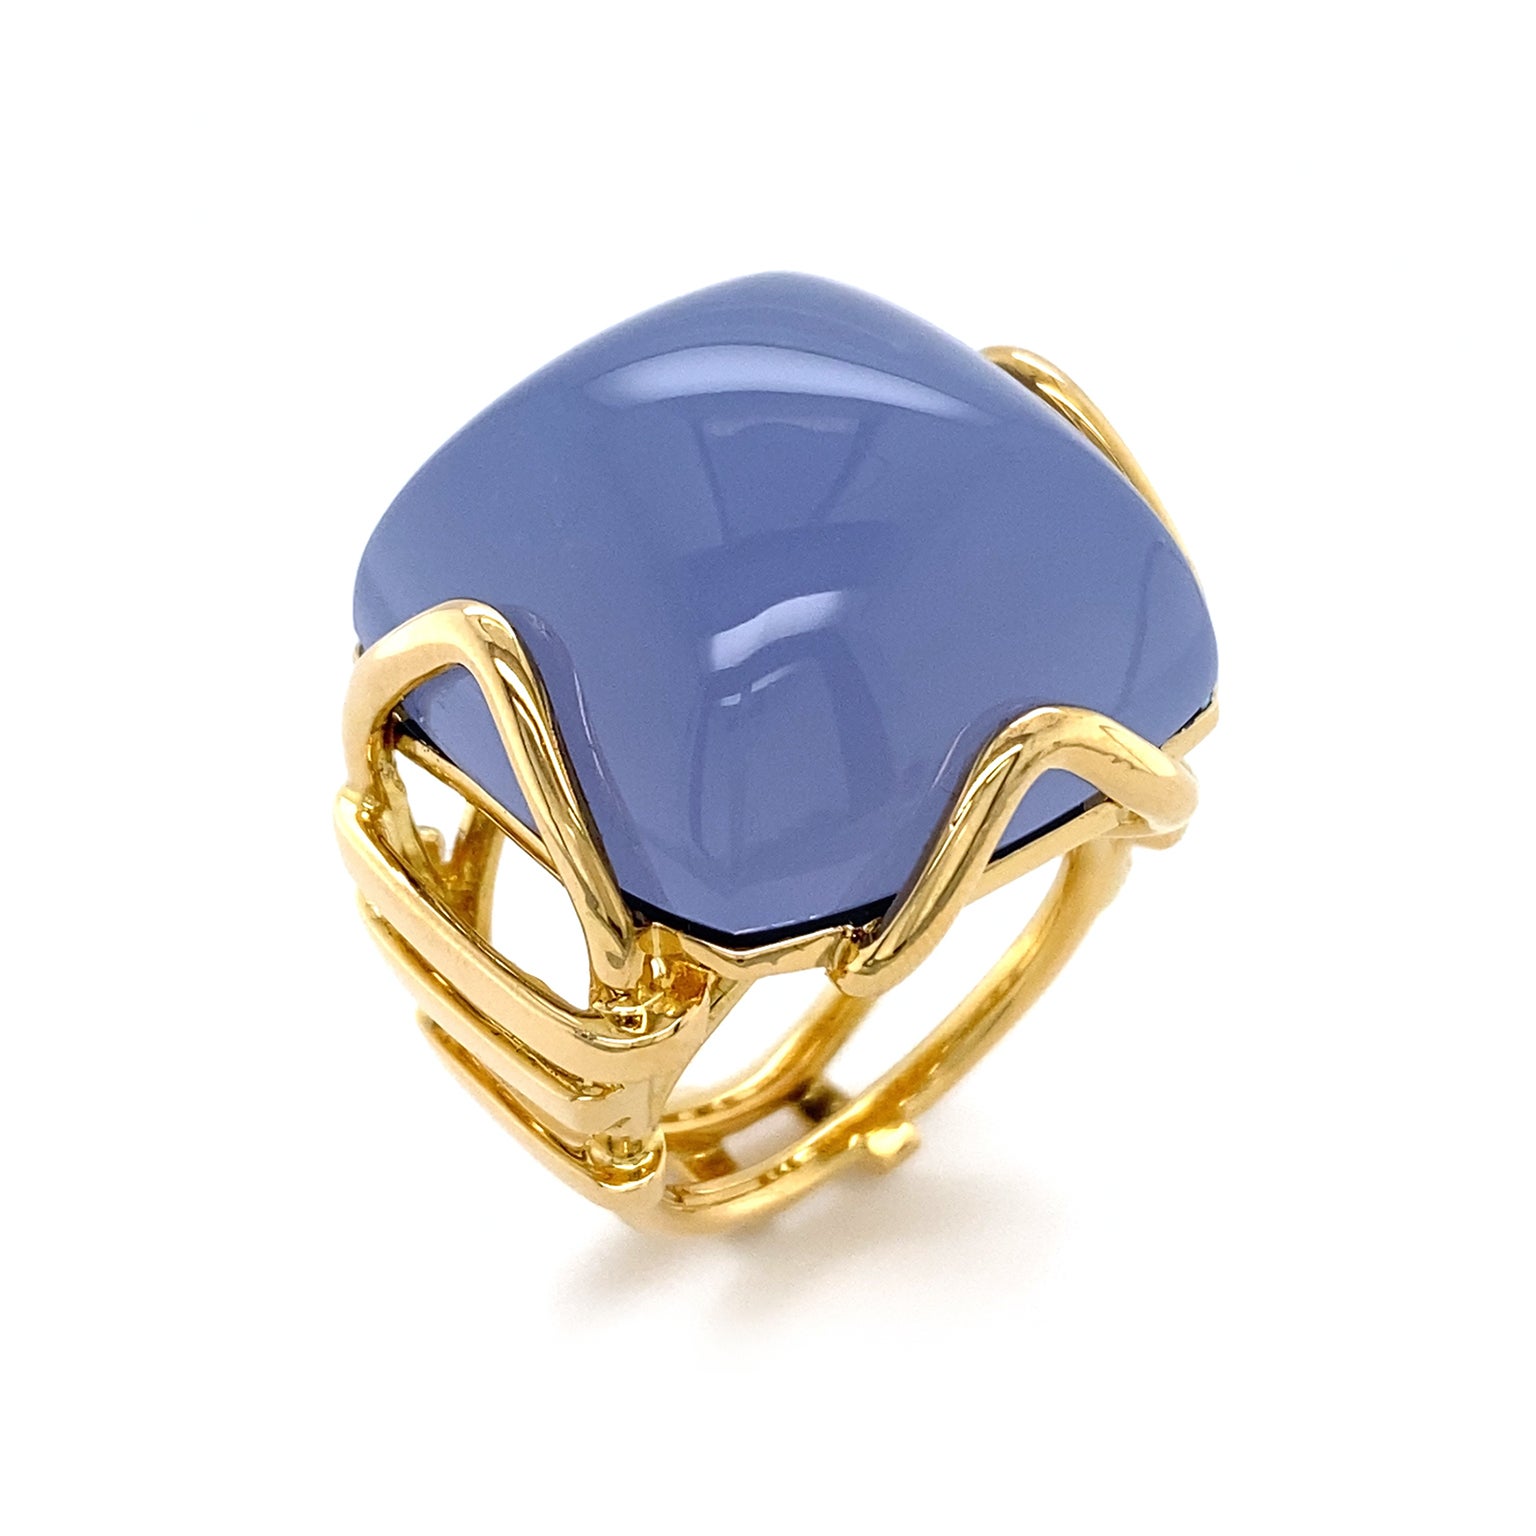 The deep lavender gray of chalcedony is displayed in this ring. 18k yellow gold triangular prongs secure a square cabochon of the gem. Slender strands of gold lay horizontal in a tapering pattern along the multi split band. The total weight of the